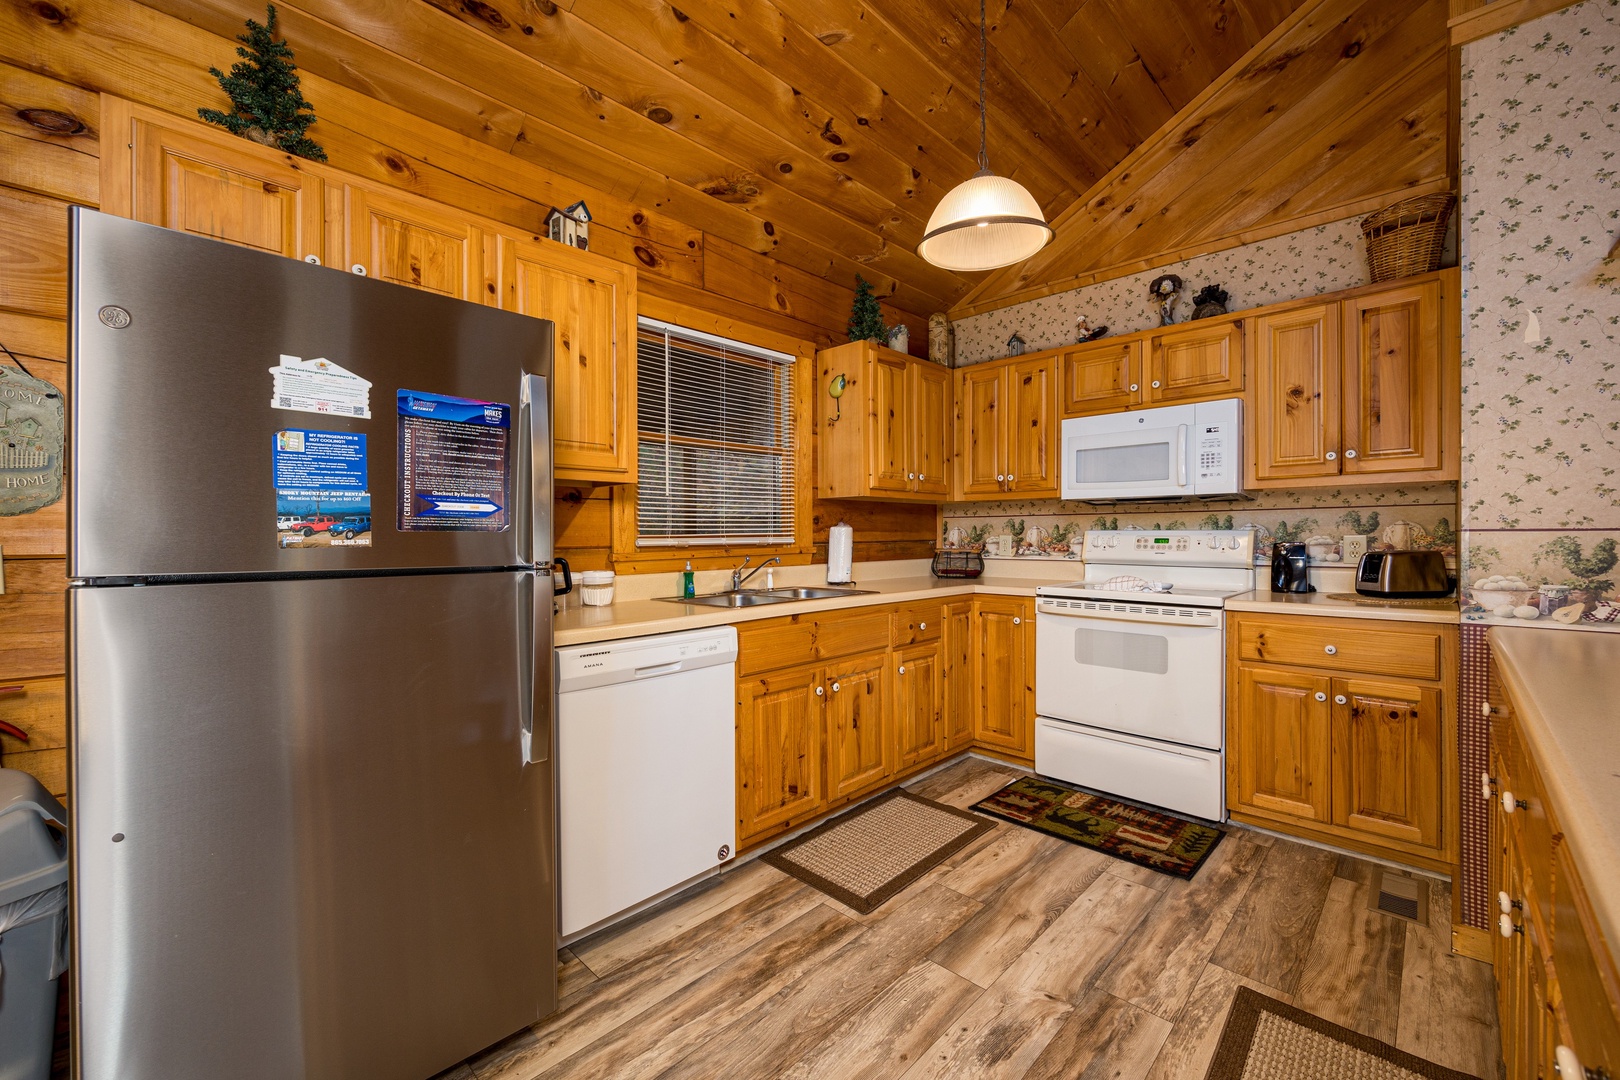 Kitchen at Eagle's Loft, a 2 bedroom cabin rental located in Pigeon Forge